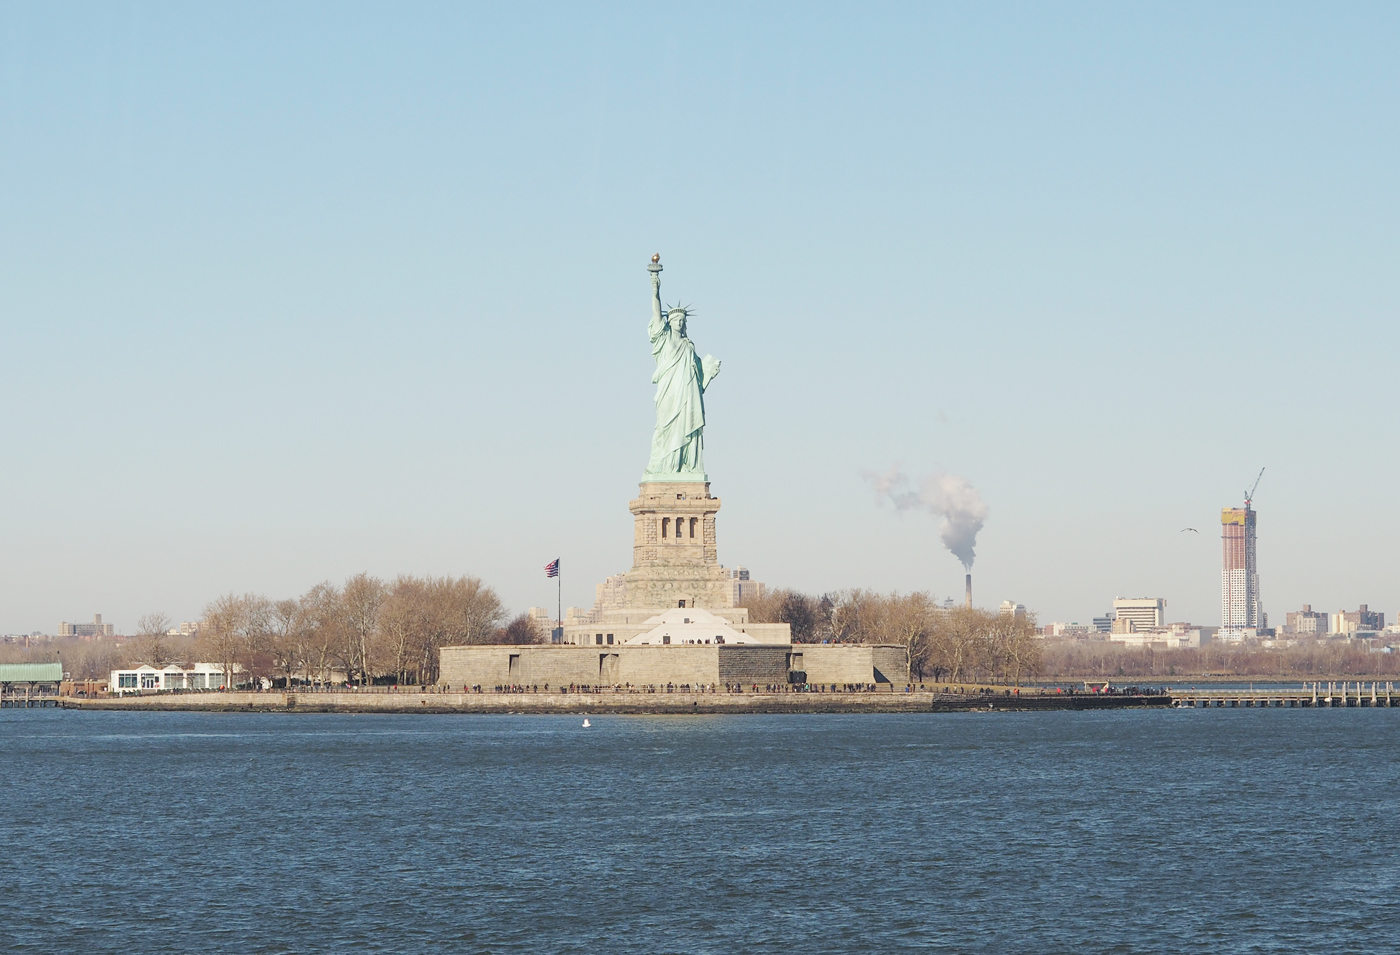 NYC STATUE OF LIBERTY